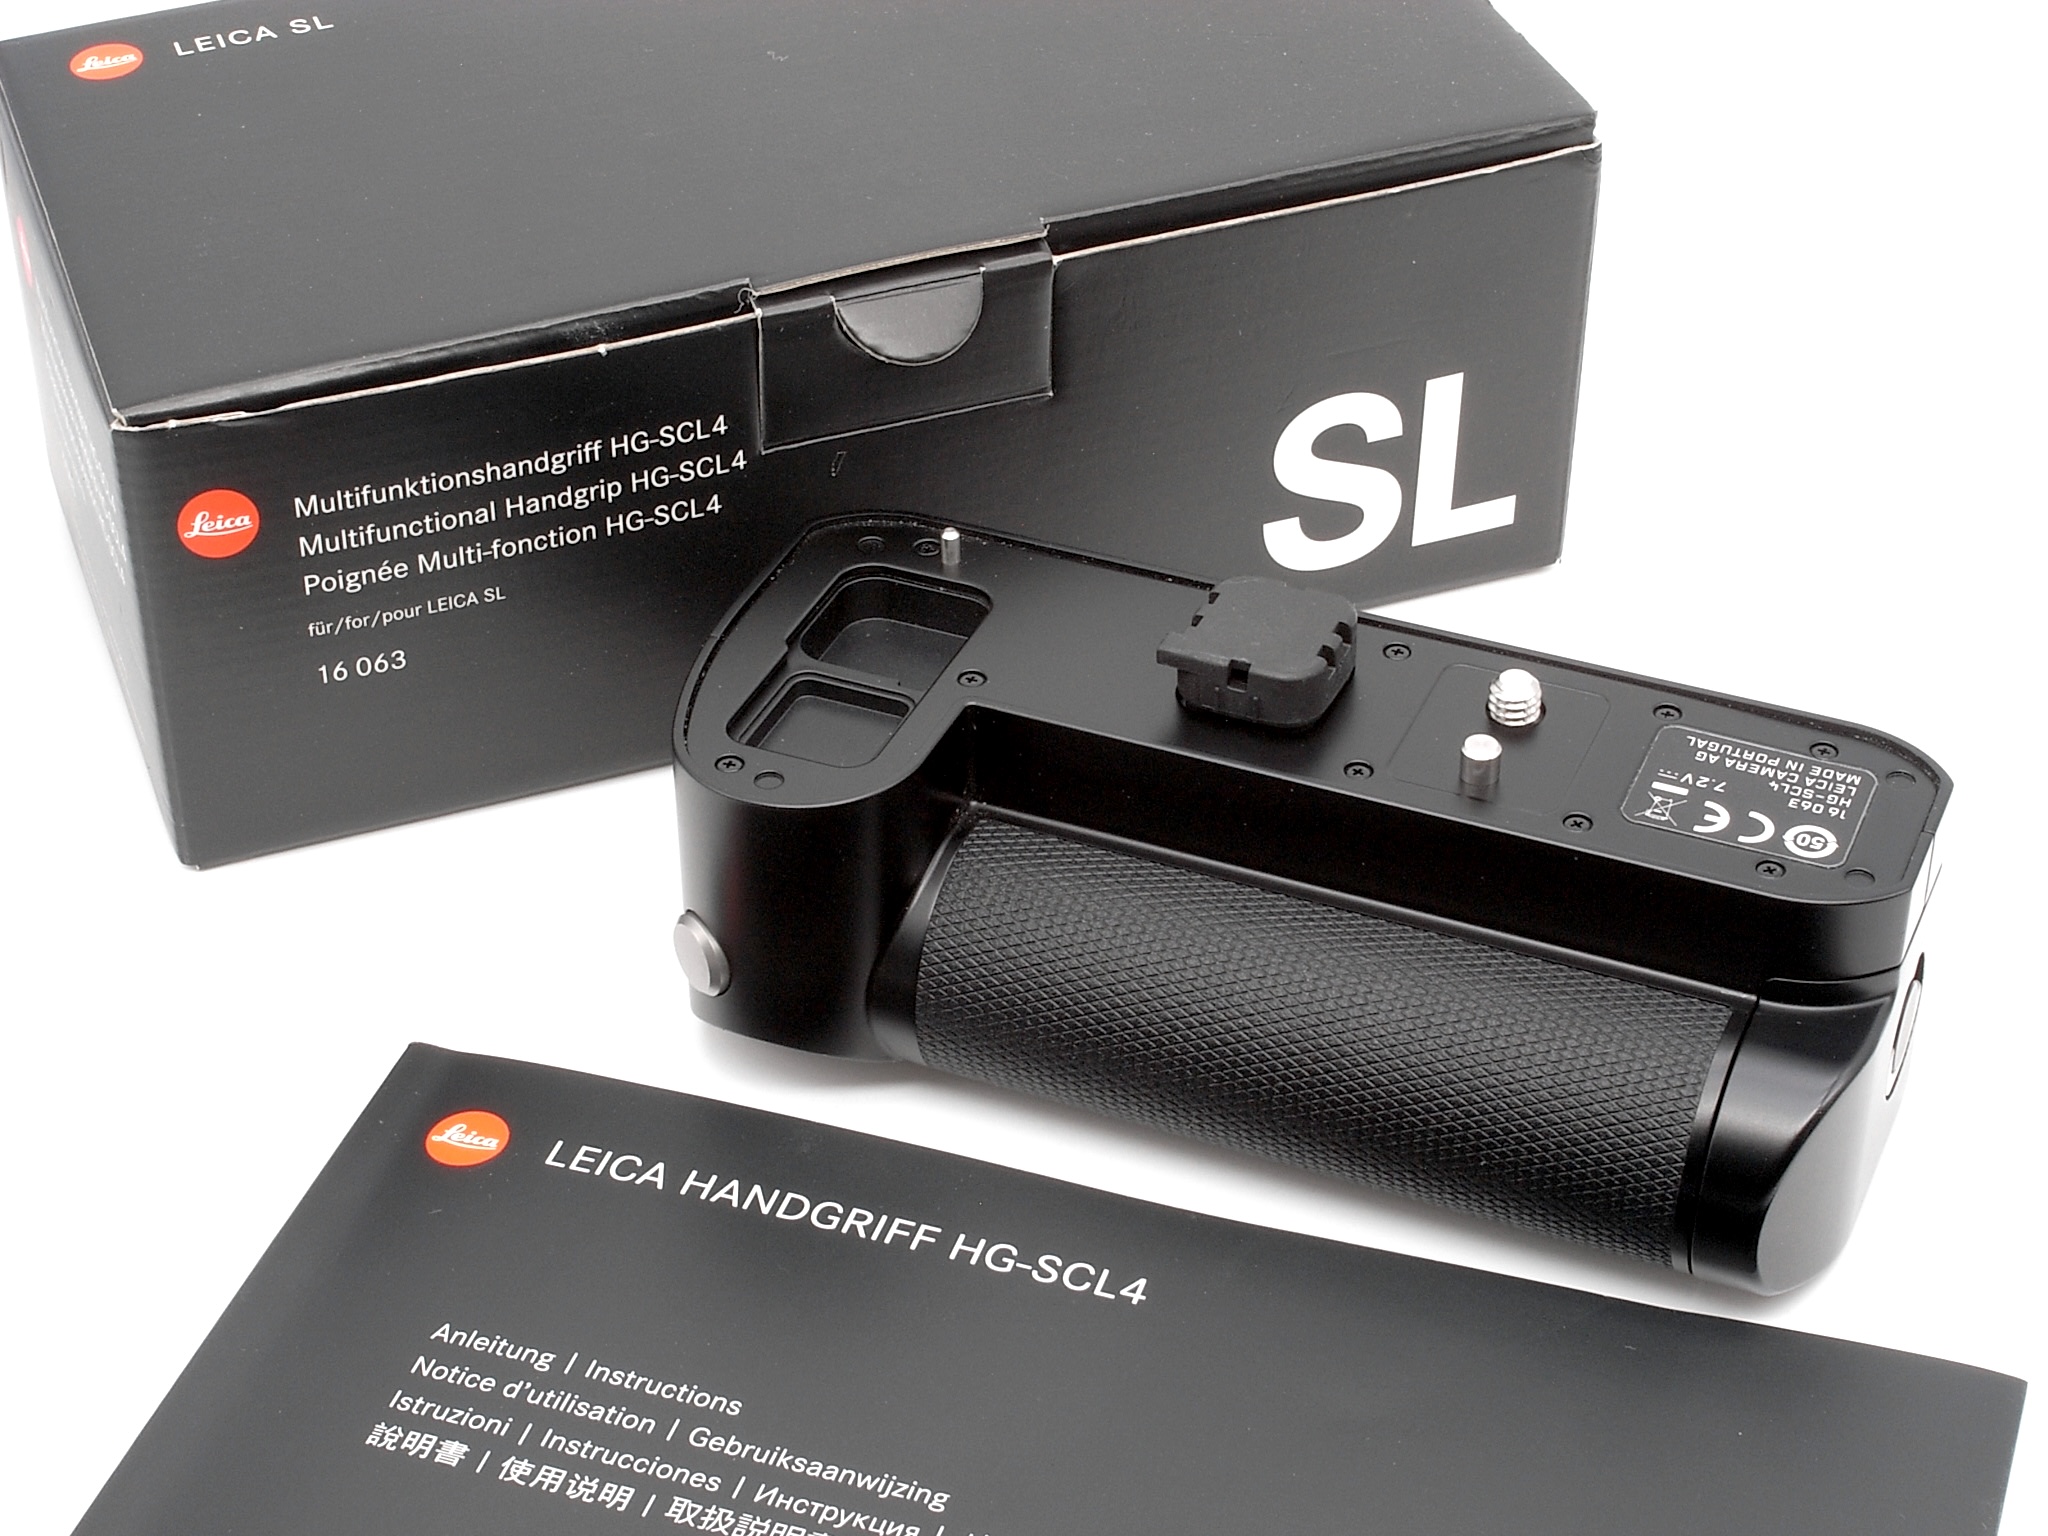 Leica Multifunktionshandgriff HG-SCL4